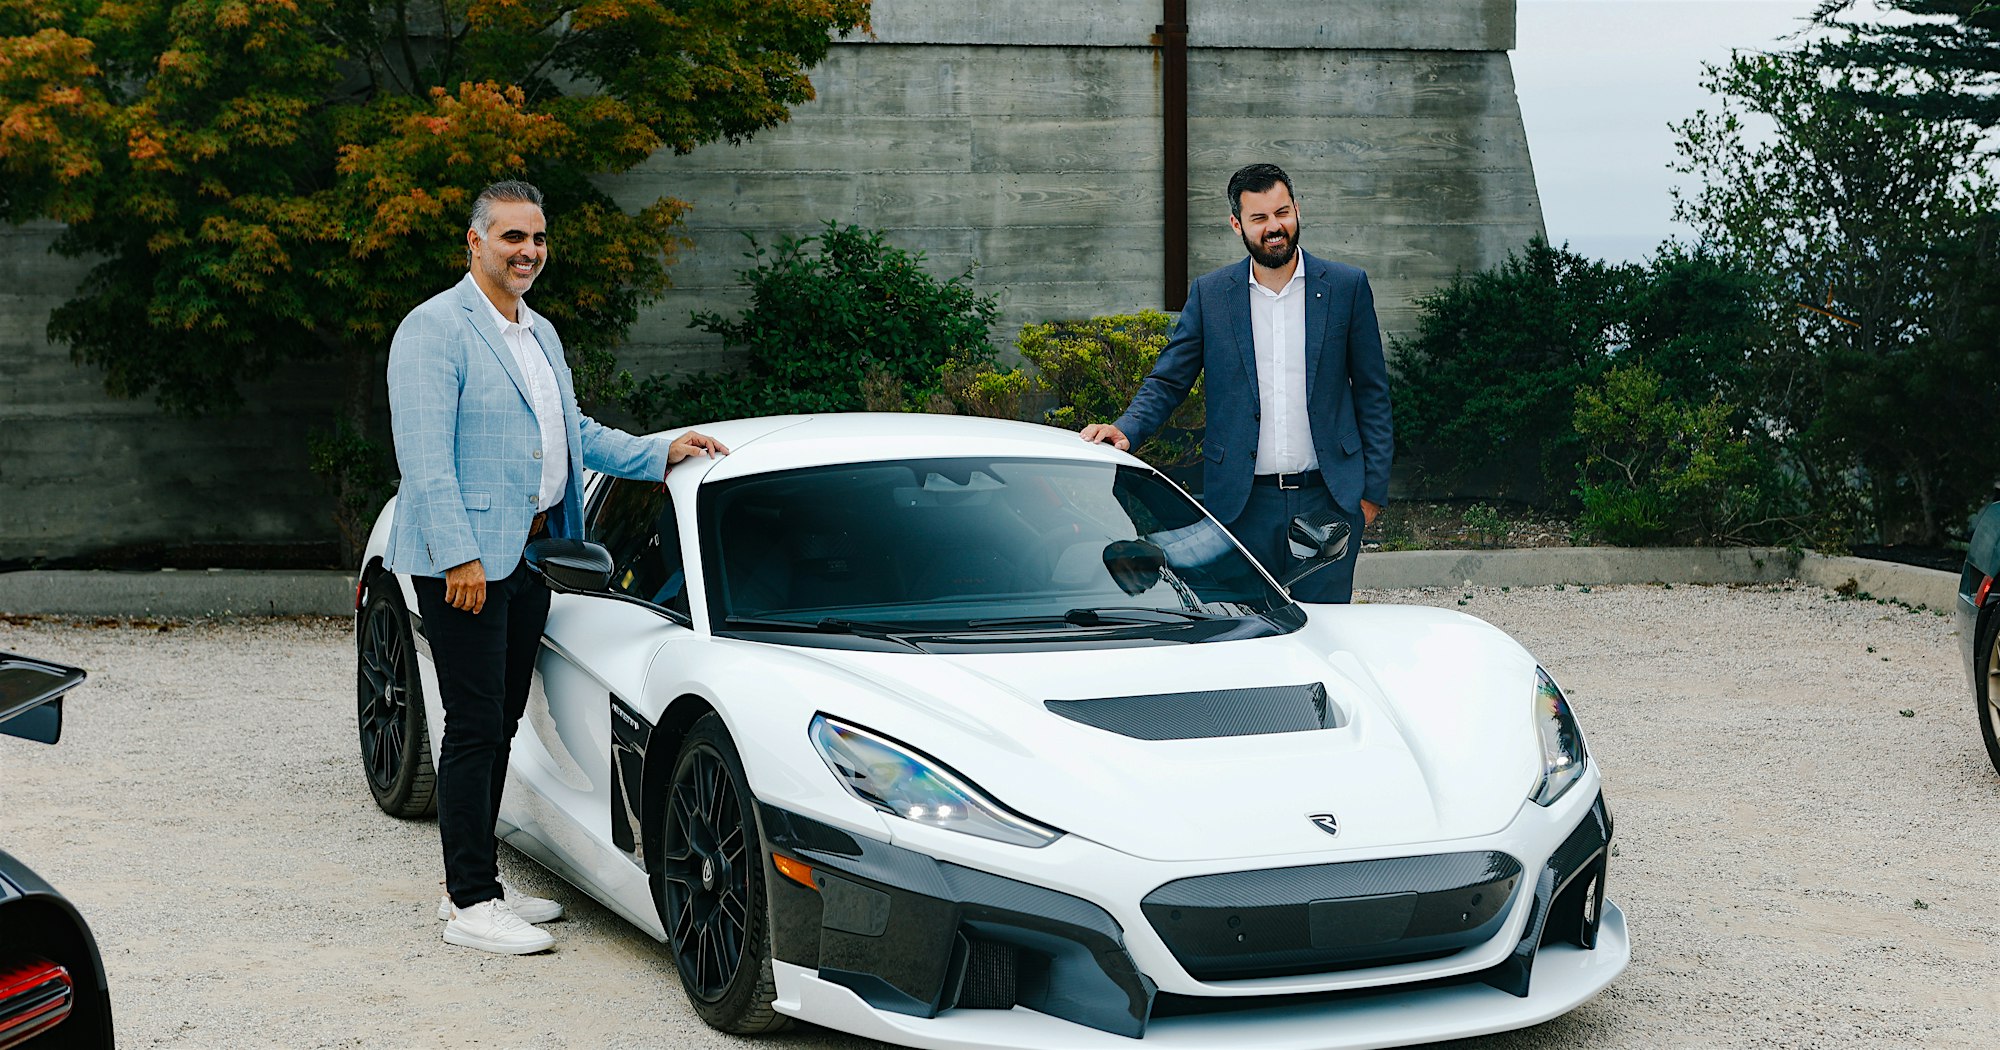 BUGATTI RIMAC AND VOLKSWAGEN GROUP OF AMERICA AGREE ON EXCLUSIVE USA DISTRIBUTION PARTNERSHIP